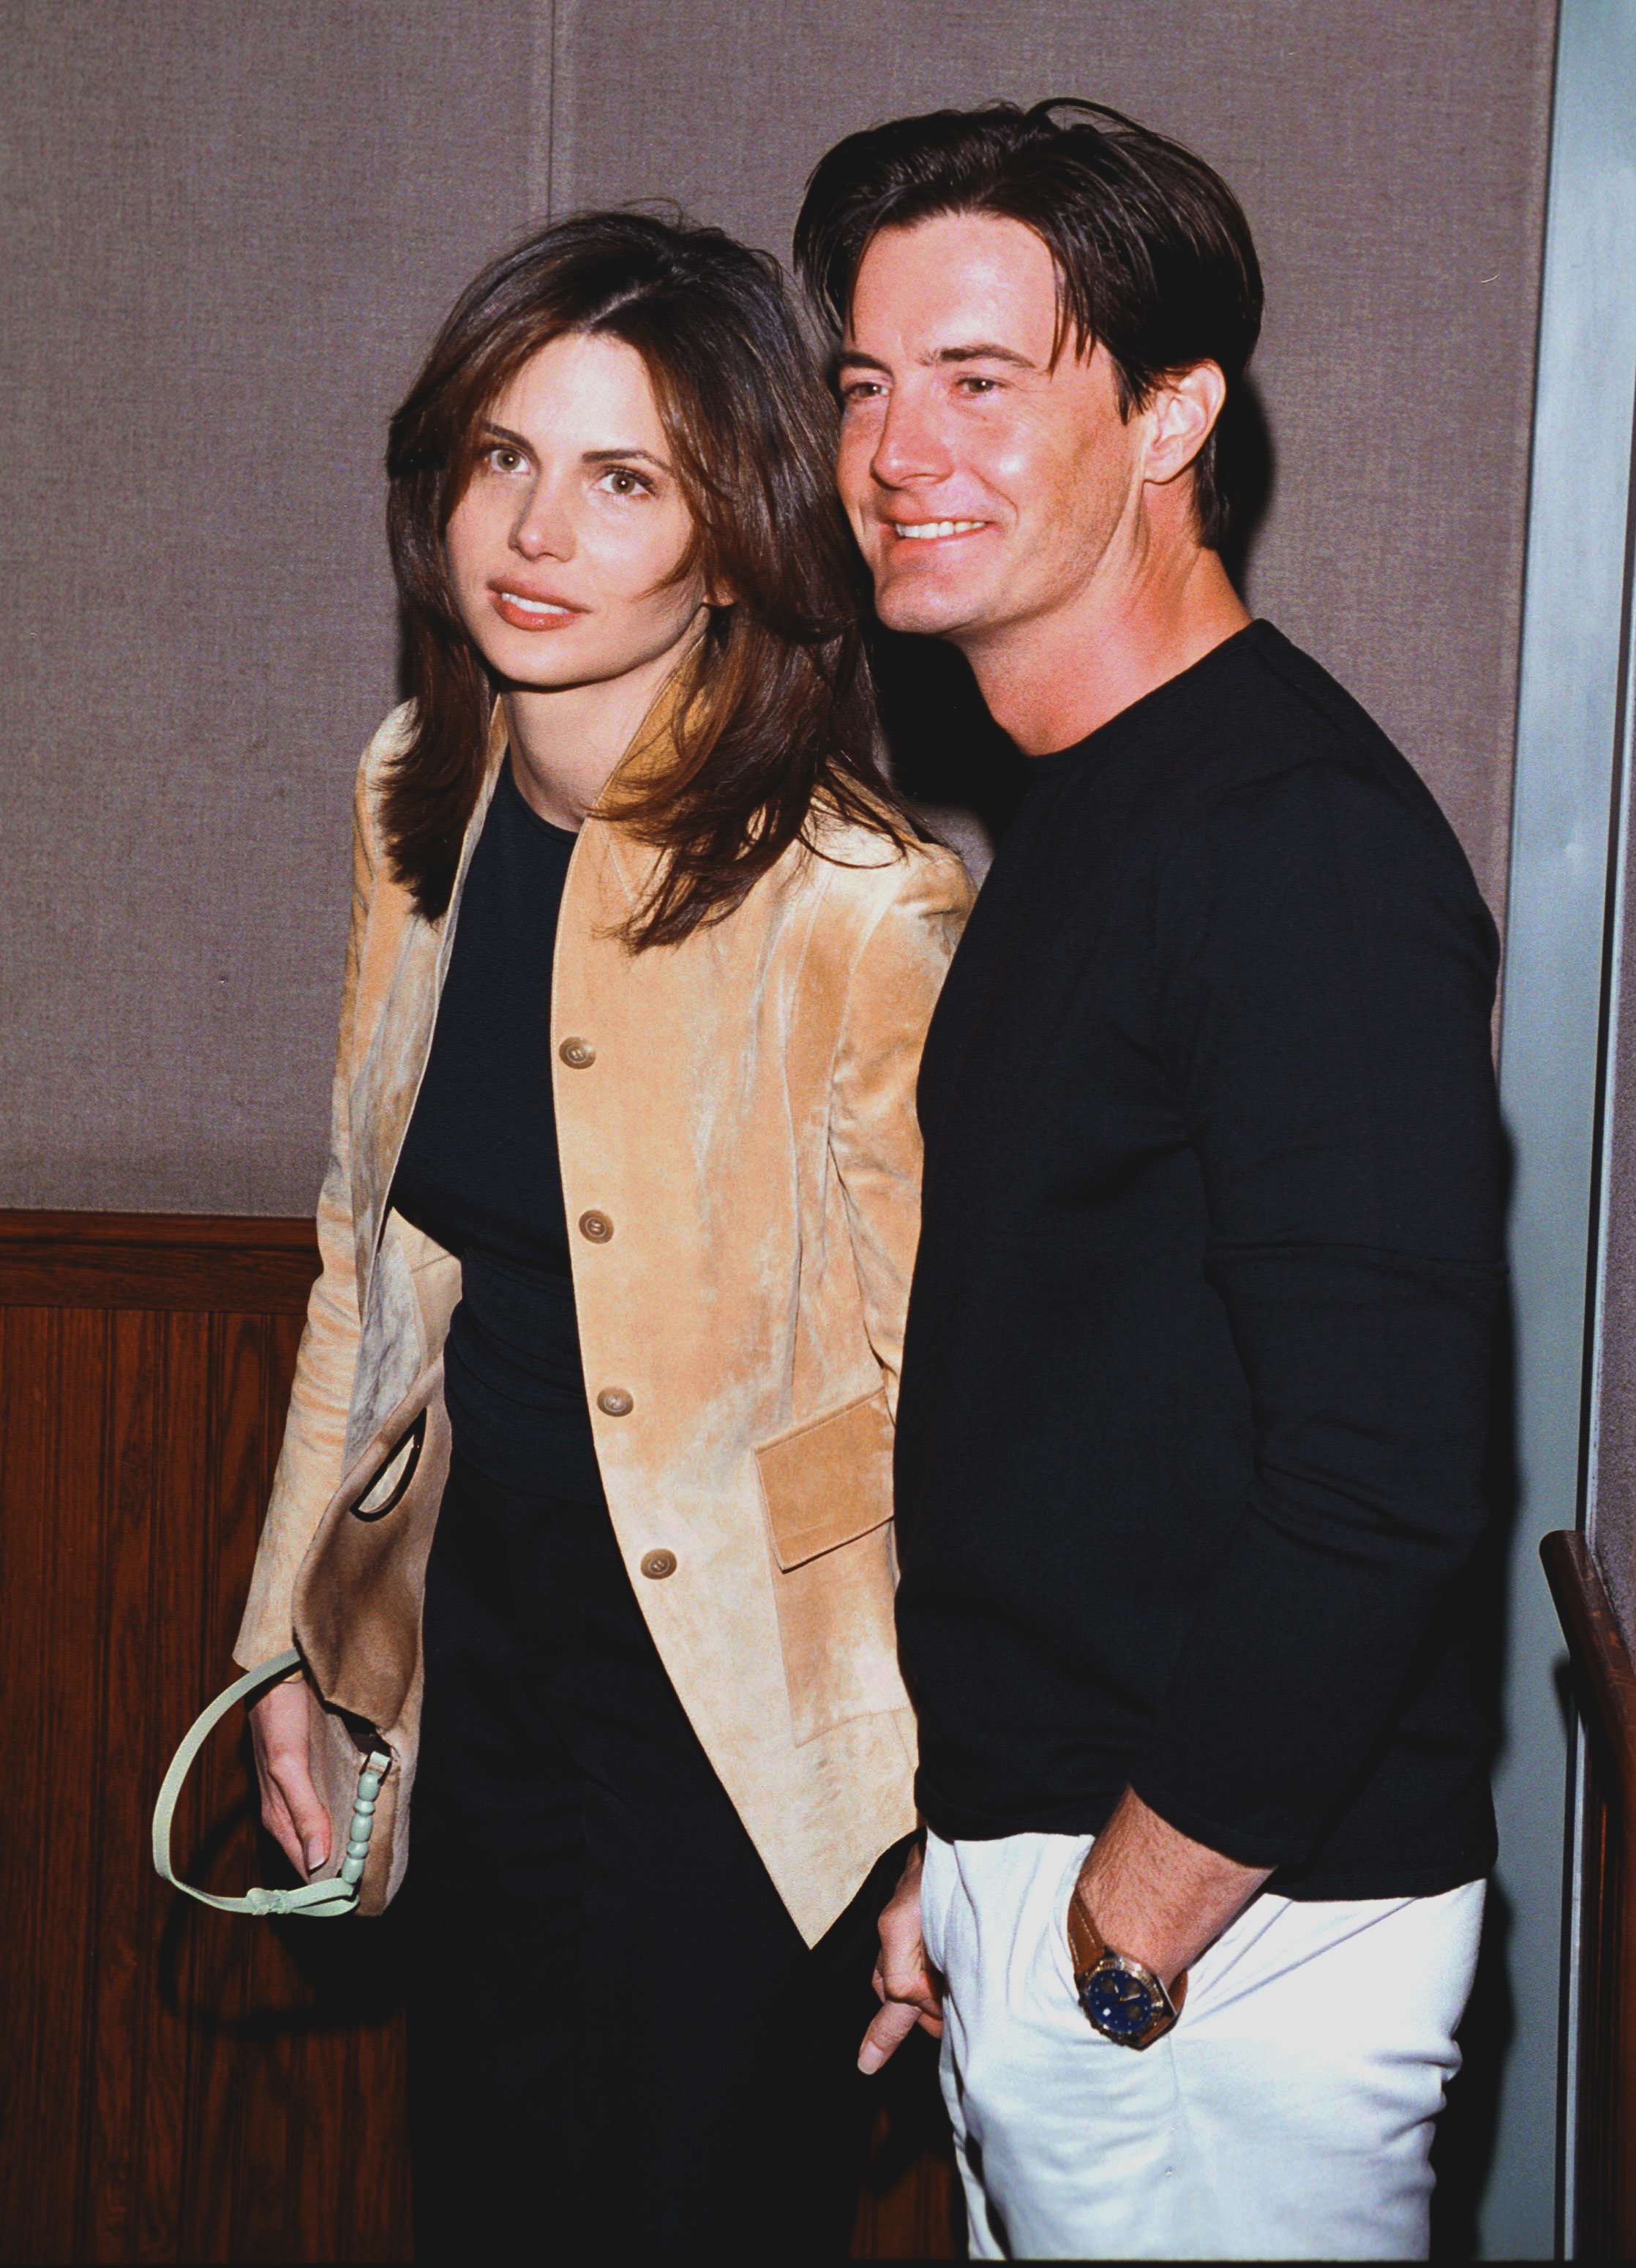 Desiree Gruber and Kyle MacLachlan at the premiere of "Hamlet" in 2000. | Source: Getty Images